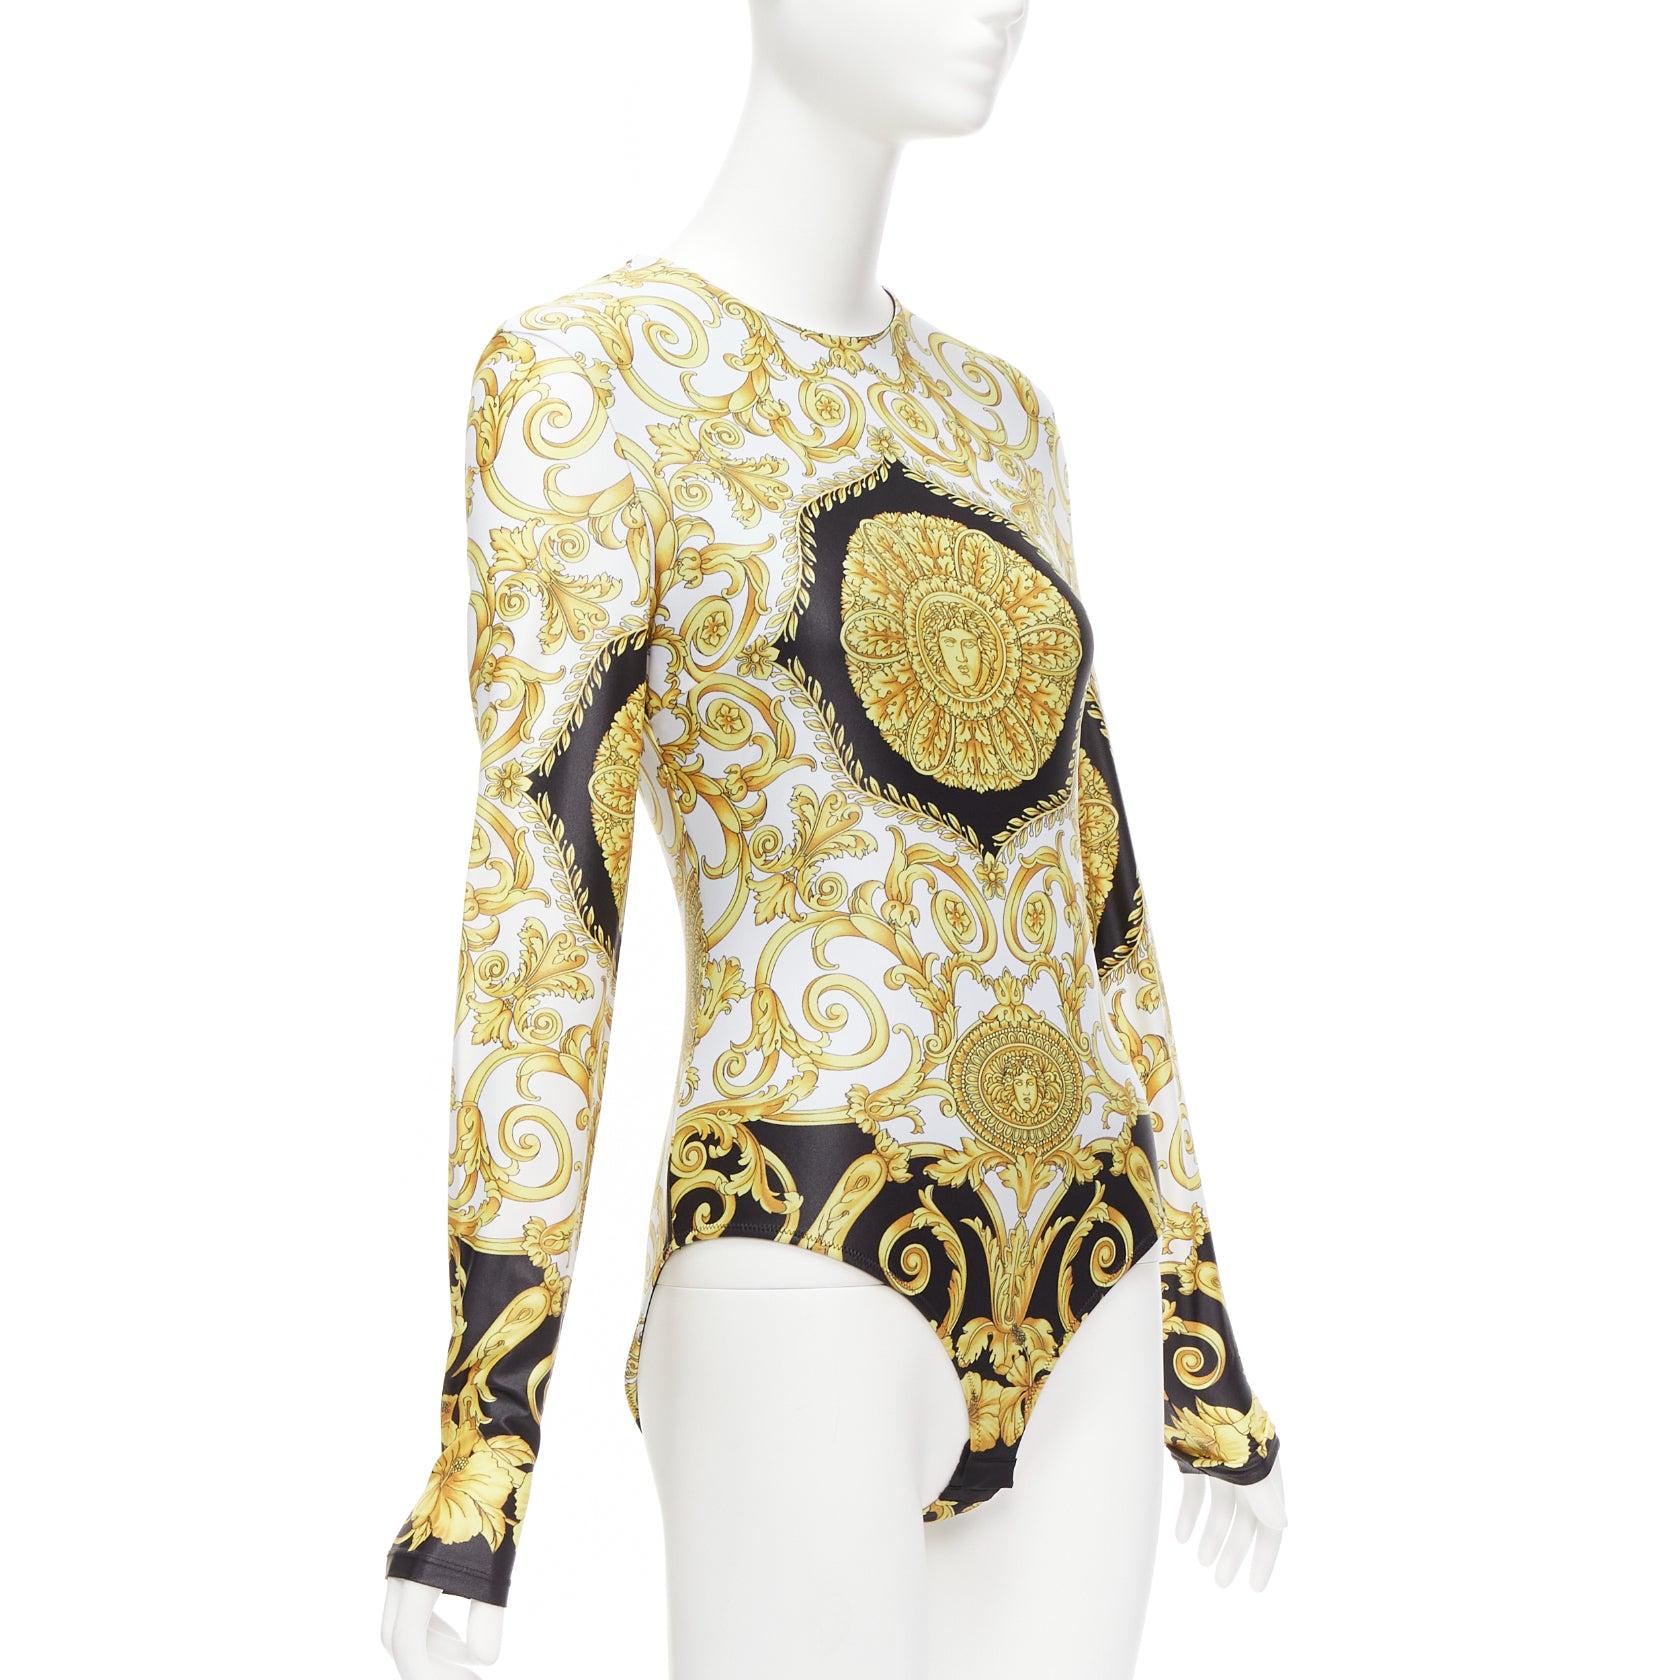 VERSACE 2018 Tribute gold Medusa Barocco long sleeve bodysuit top IT38 XS
Reference: AAWC/A00605
Brand: Versace
Designer: Donatella Versace
Collection: 2018 Tribute
Material: Polyamide, Elastane
Color: Gold, Black
Pattern: Floral
Closure: Zip
Extra